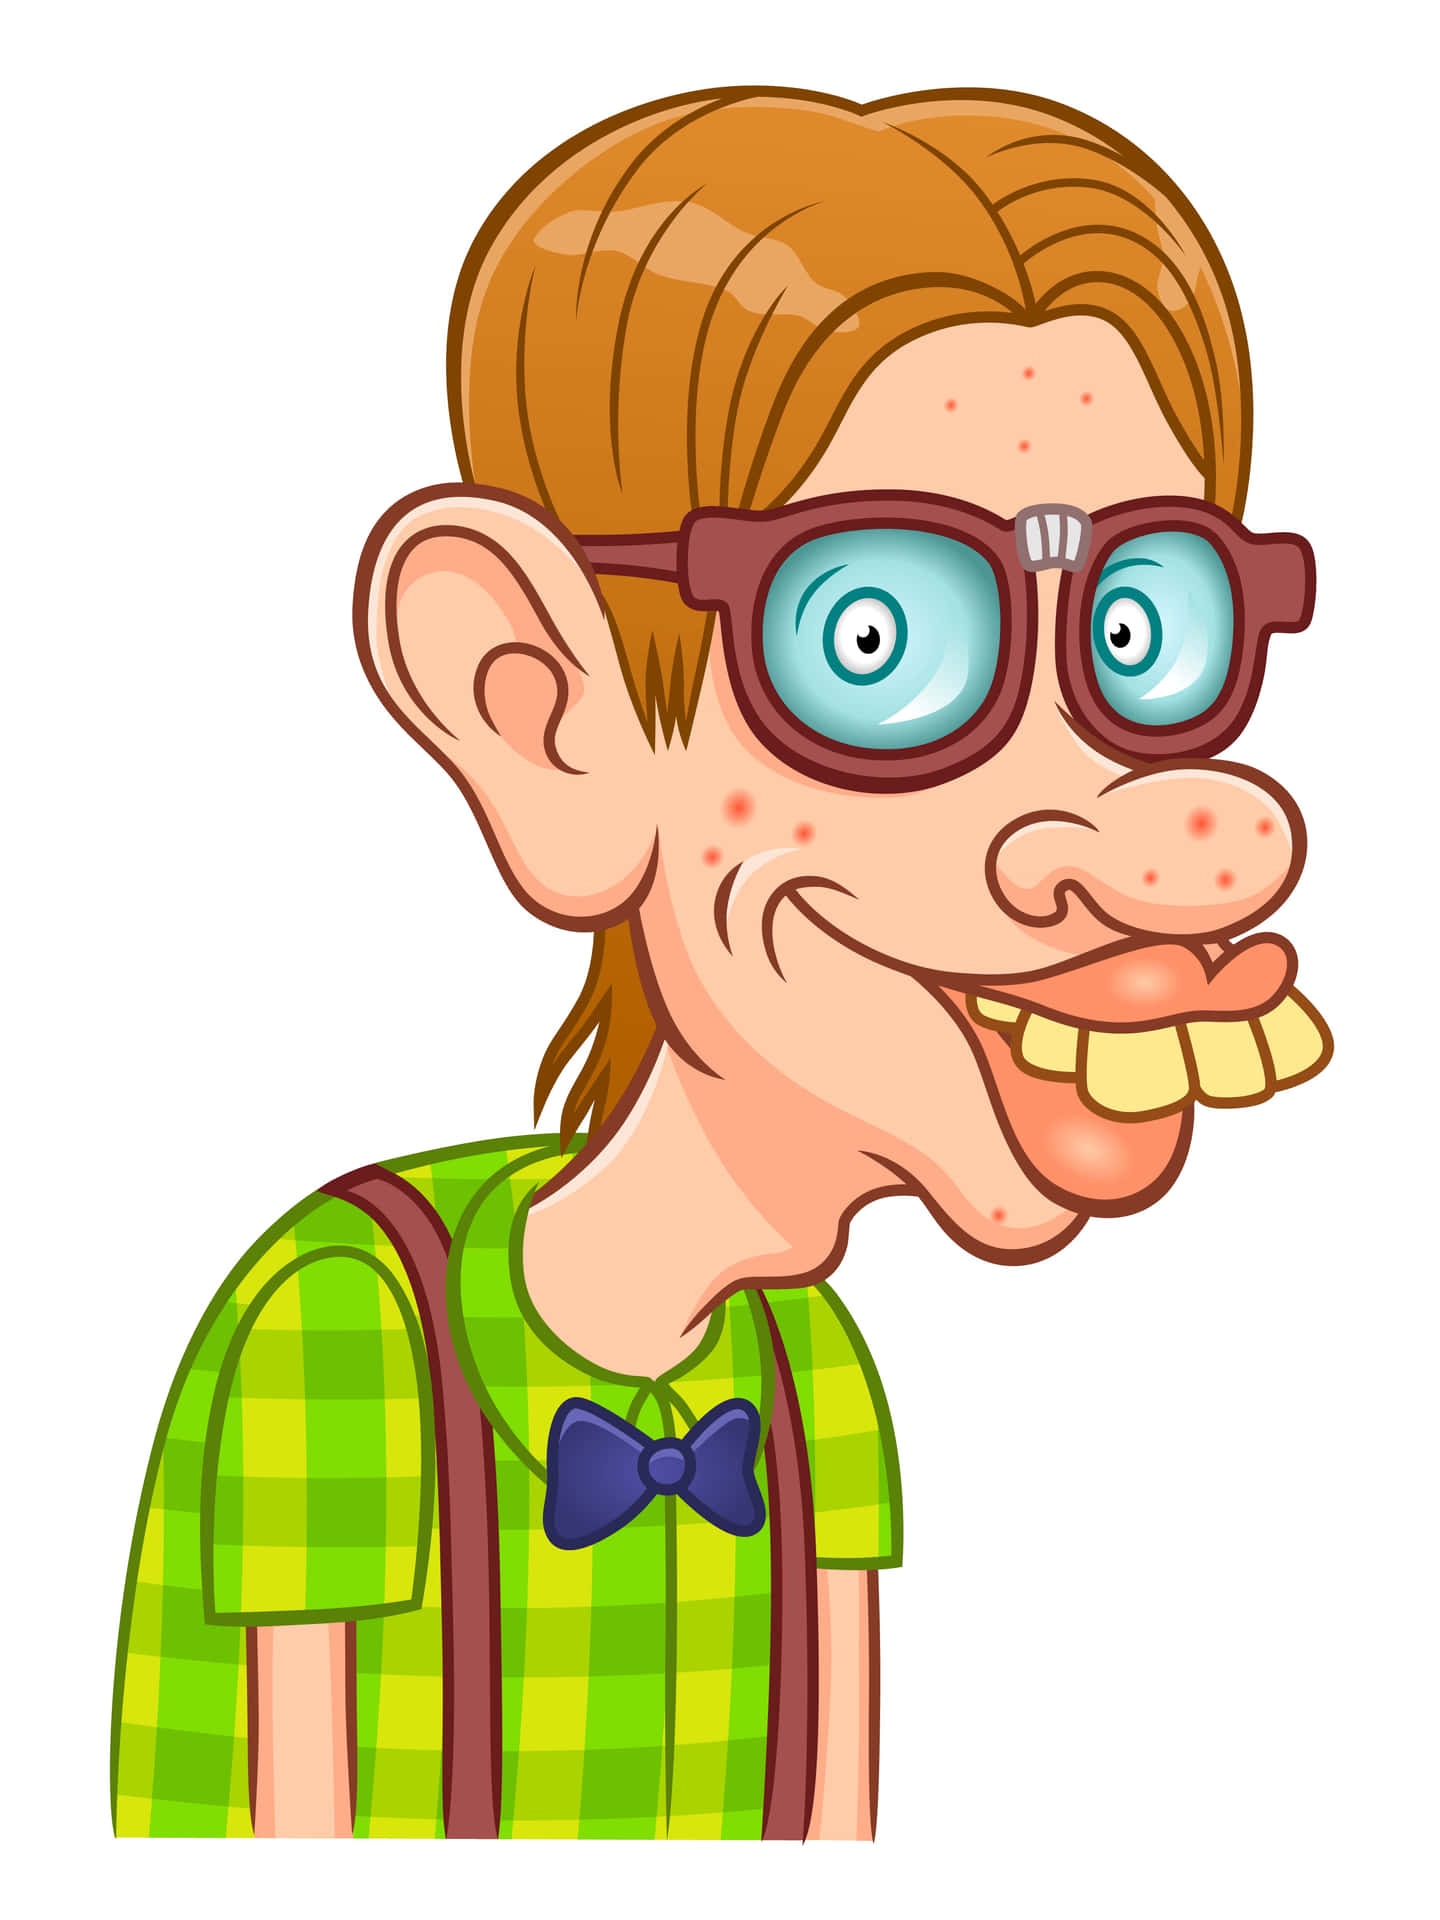 Cartoon Man With Glasses And A Bow Tie